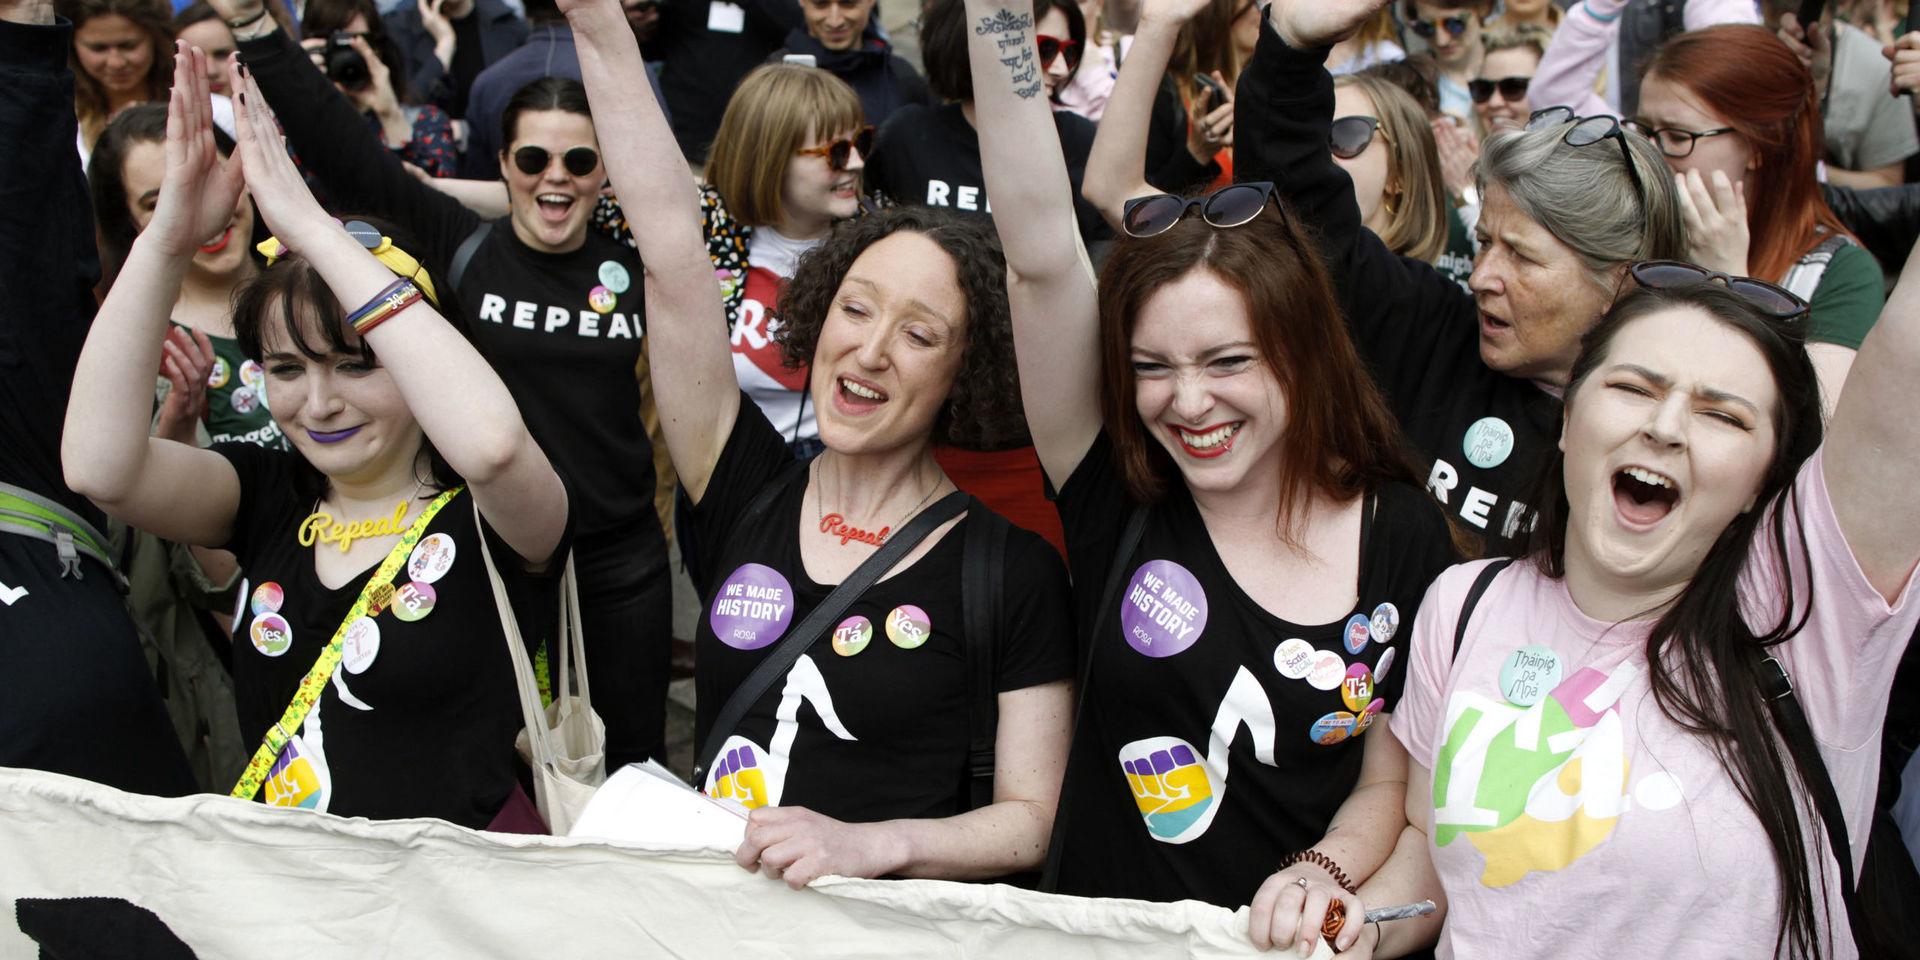 People from the &quot;Yes&quot; campaign react as the results of the votes begin to come in, after the Irish referendum on the 8th Amendment of the Irish Constitution at Dublin Castle, in Dublin, Ireland, Saturday May 26, 2018. The first official results for Ireland&apos;s landmark abortion referendum have begun to come in, indicating a landslide win for abortion rights campaigners is likely in diverse constituencies across the country. (AP Photo/Peter Morrison)